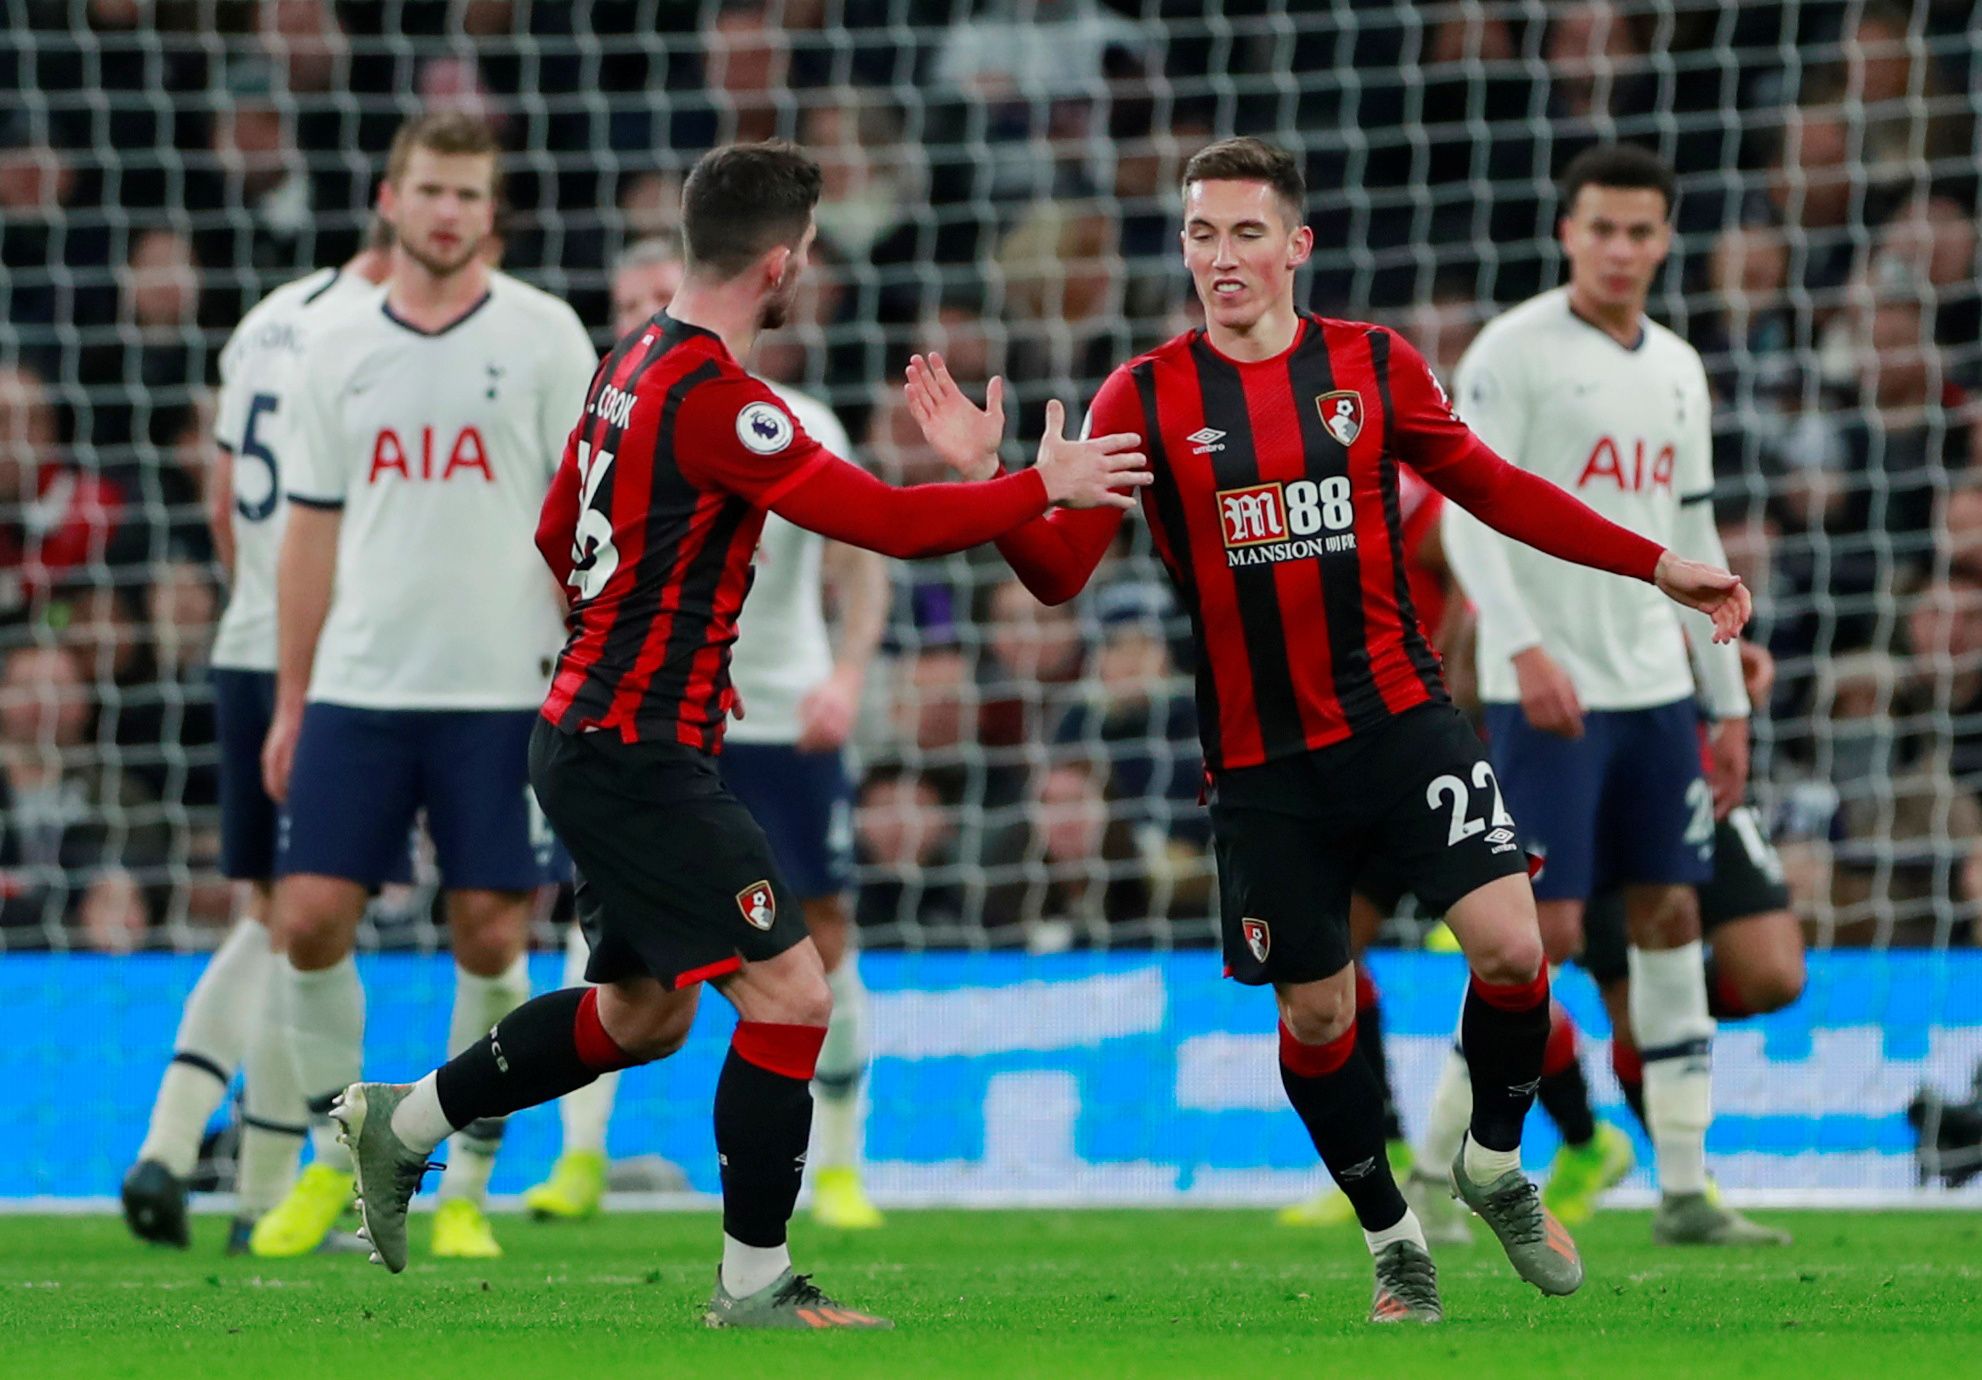 Soccer Football - Premier League - Tottenham Hotspur v AFC Bournemouth - Tottenham Hotspur Stadium, London, Britain - November 30, 2019 Bournemouth's Harry Wilson celebrates scoring their first goal  Action Images via Reuters/Andrew Couldridge  EDITORIAL USE ONLY. No use with unauthorized audio, video, data, fixture lists, club/league logos or 